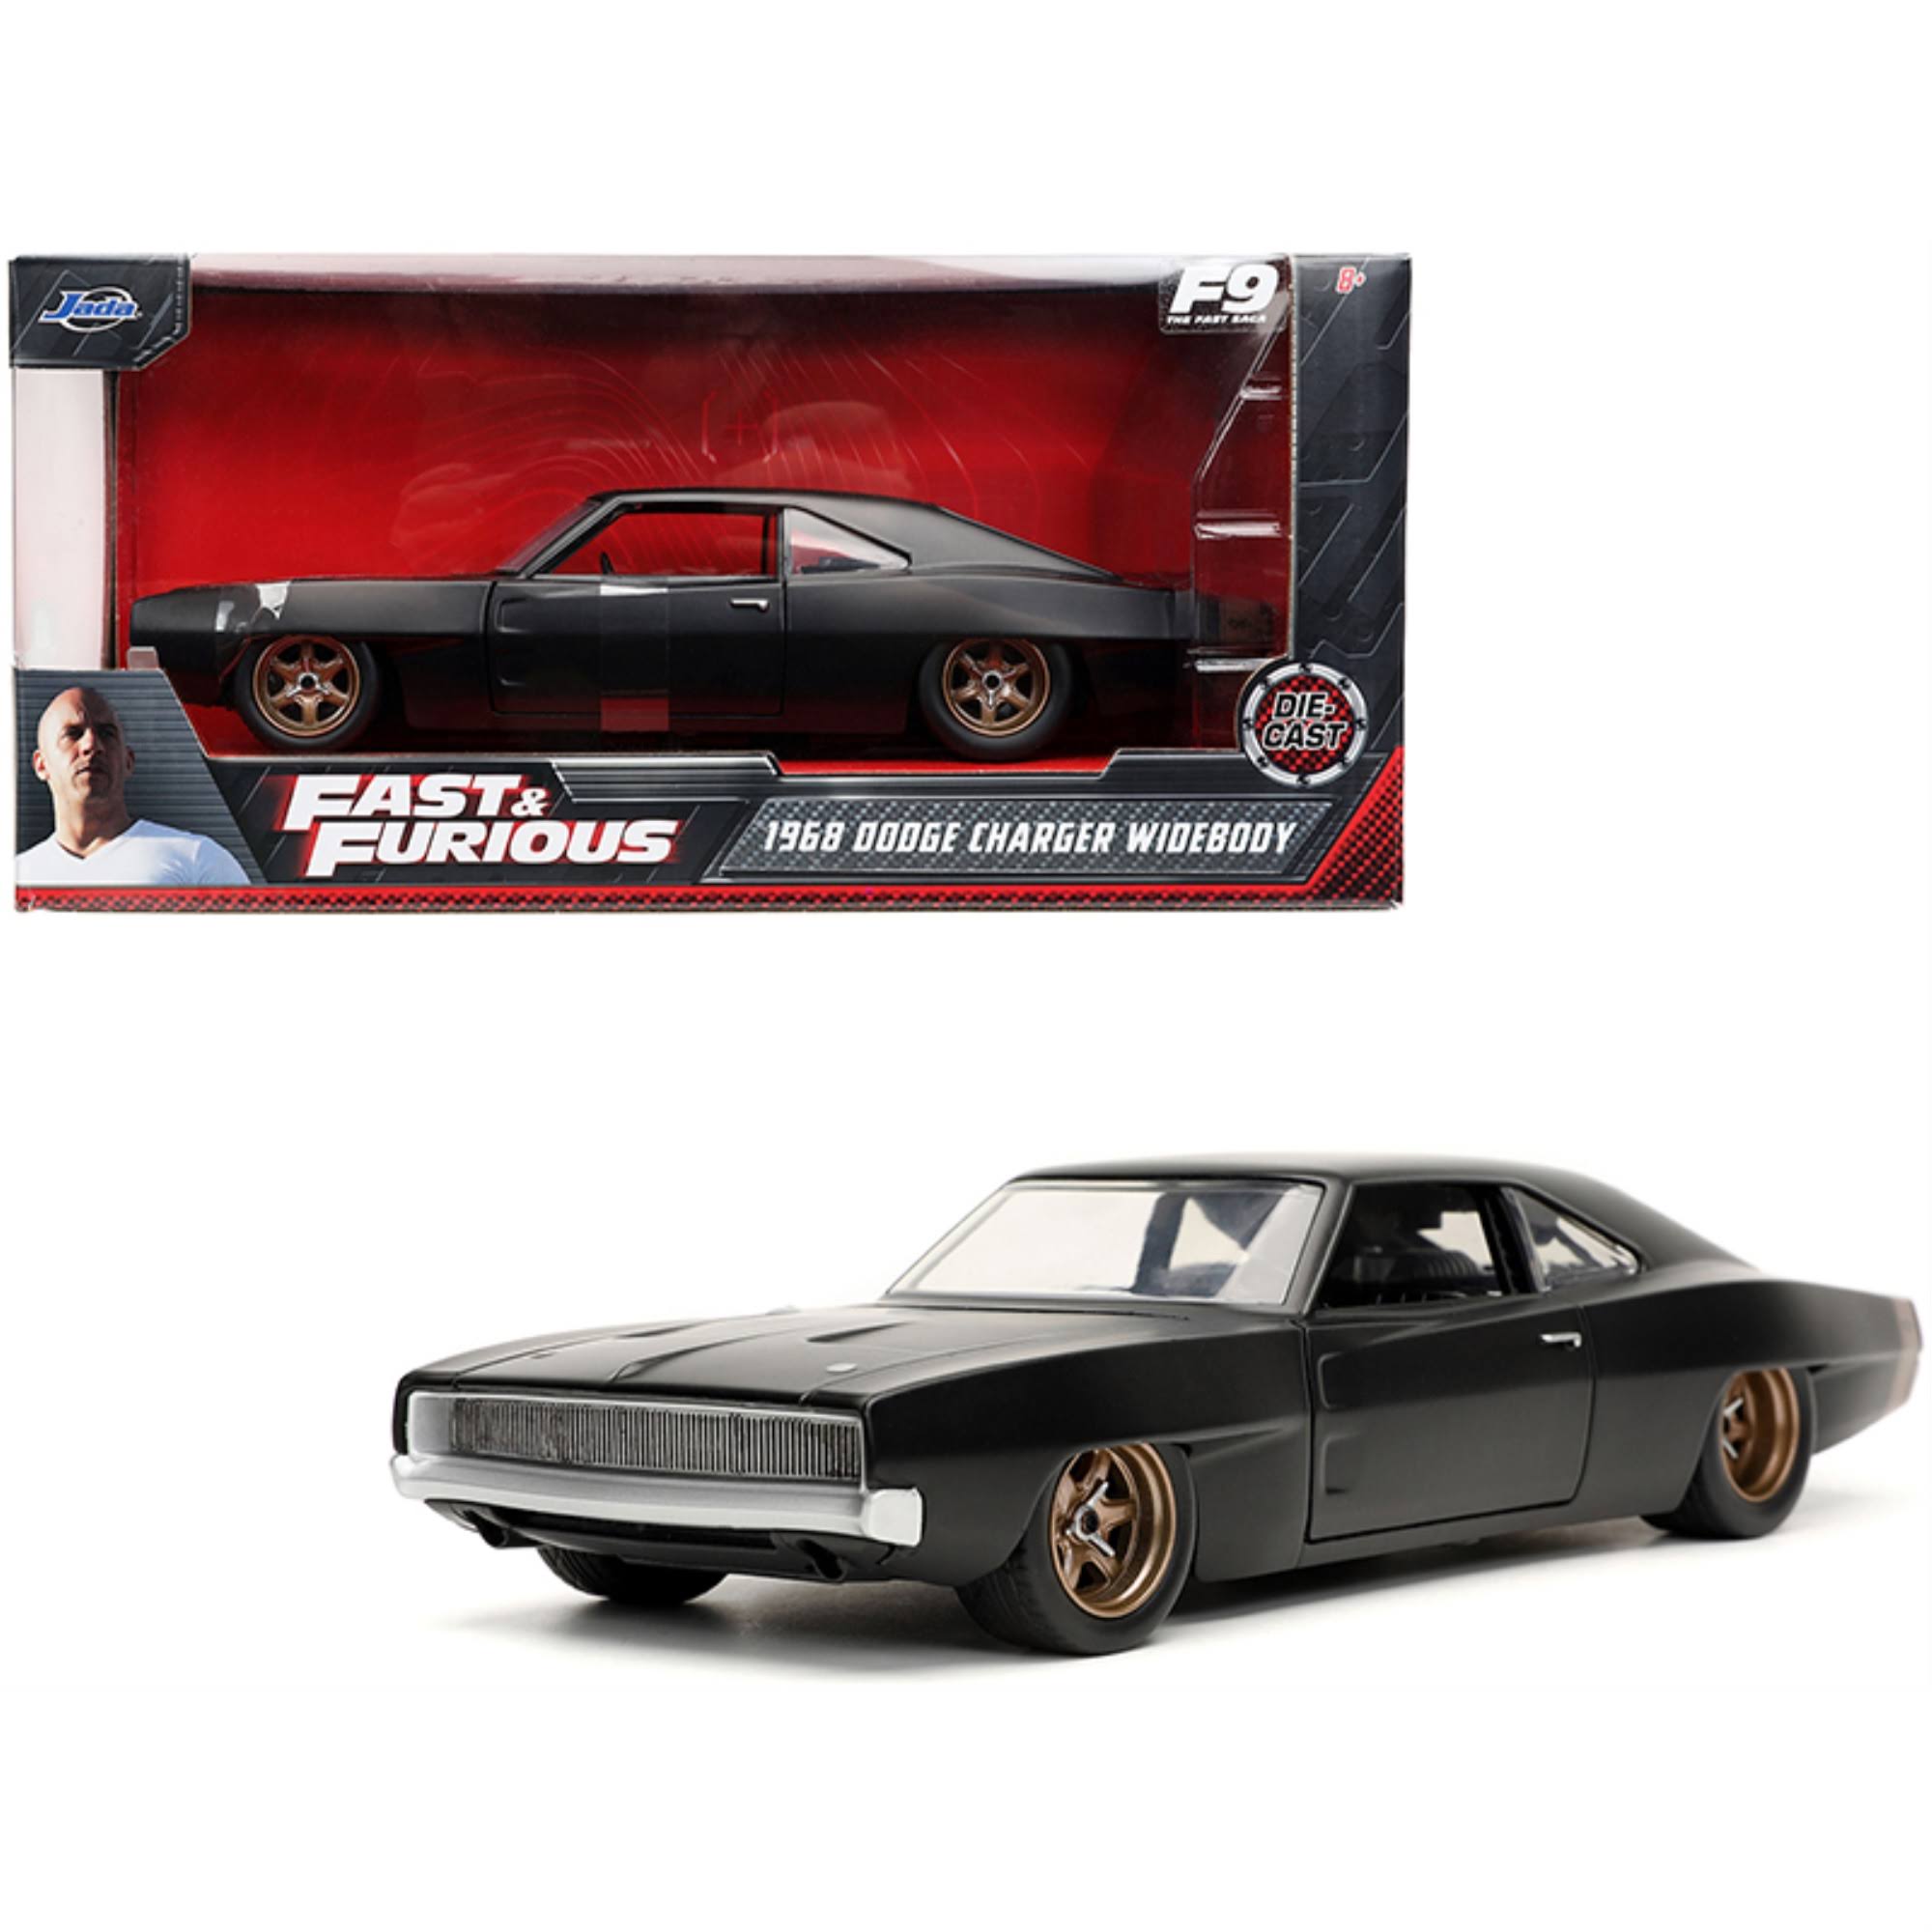 Fast and Furious 1968 Dodge Charger Widebody 1:24 Jada 32614